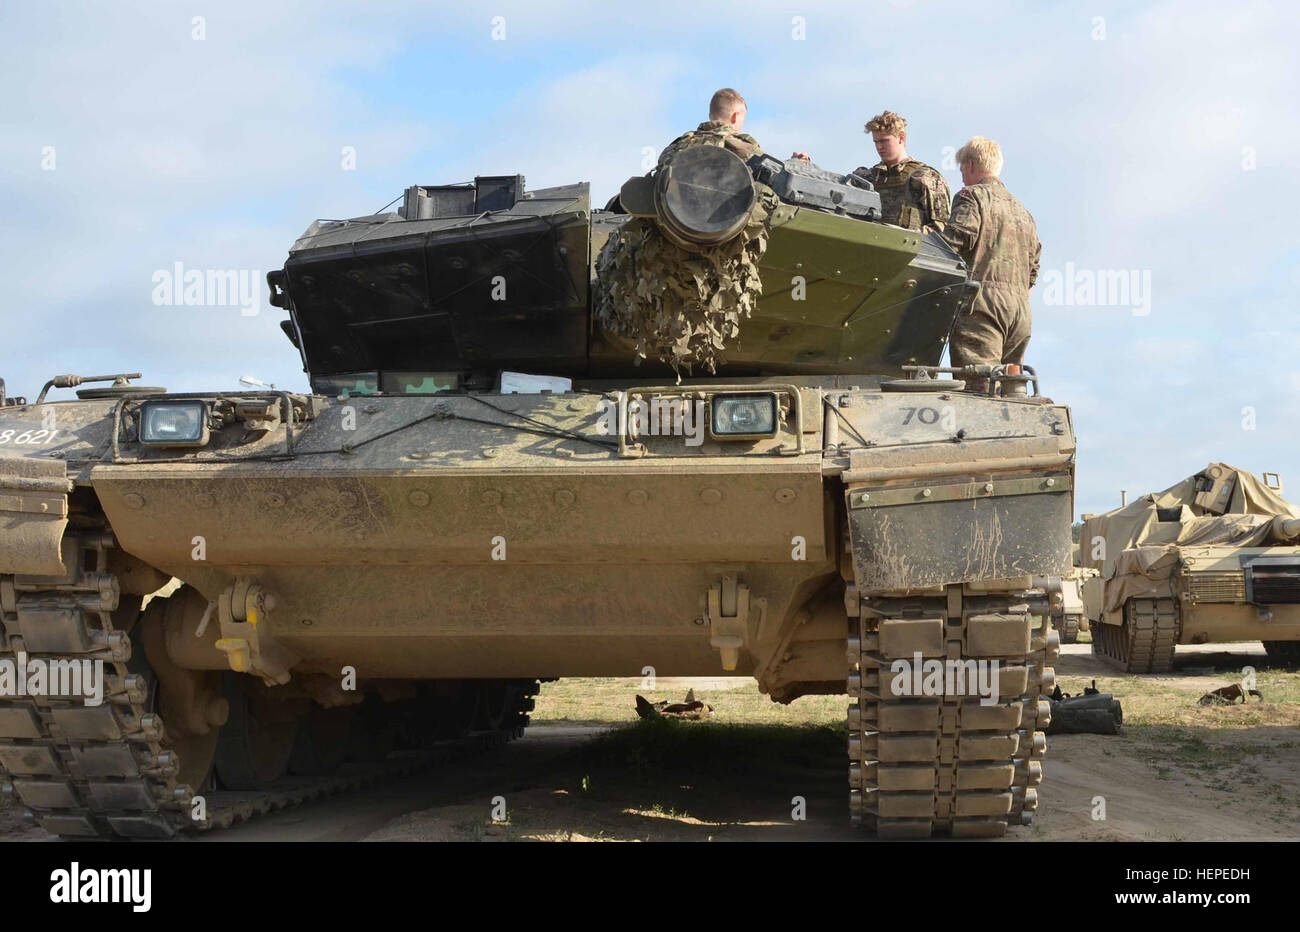 Danish soldiers assigned the Dragoon Regiment, 1st Armored Battalion, 1st Danish Tank Squadron, prepare to get inside their Leopard 2A5 Battle Tank June 8, 2015 at Drawsko Pomorskie